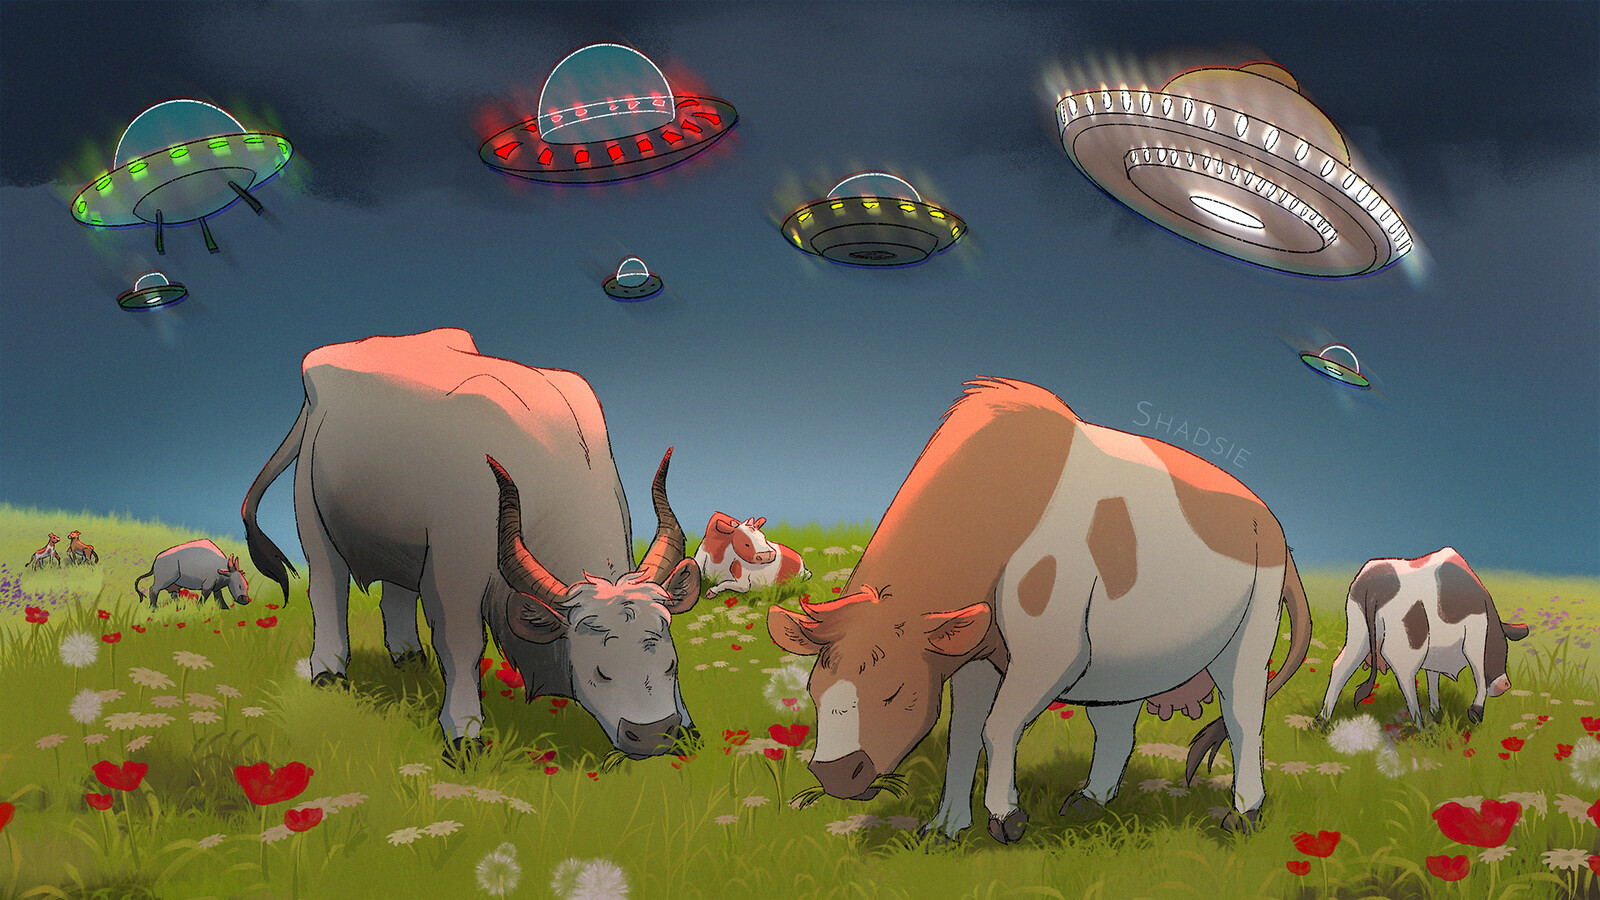 final illustration version b, the ufos appear